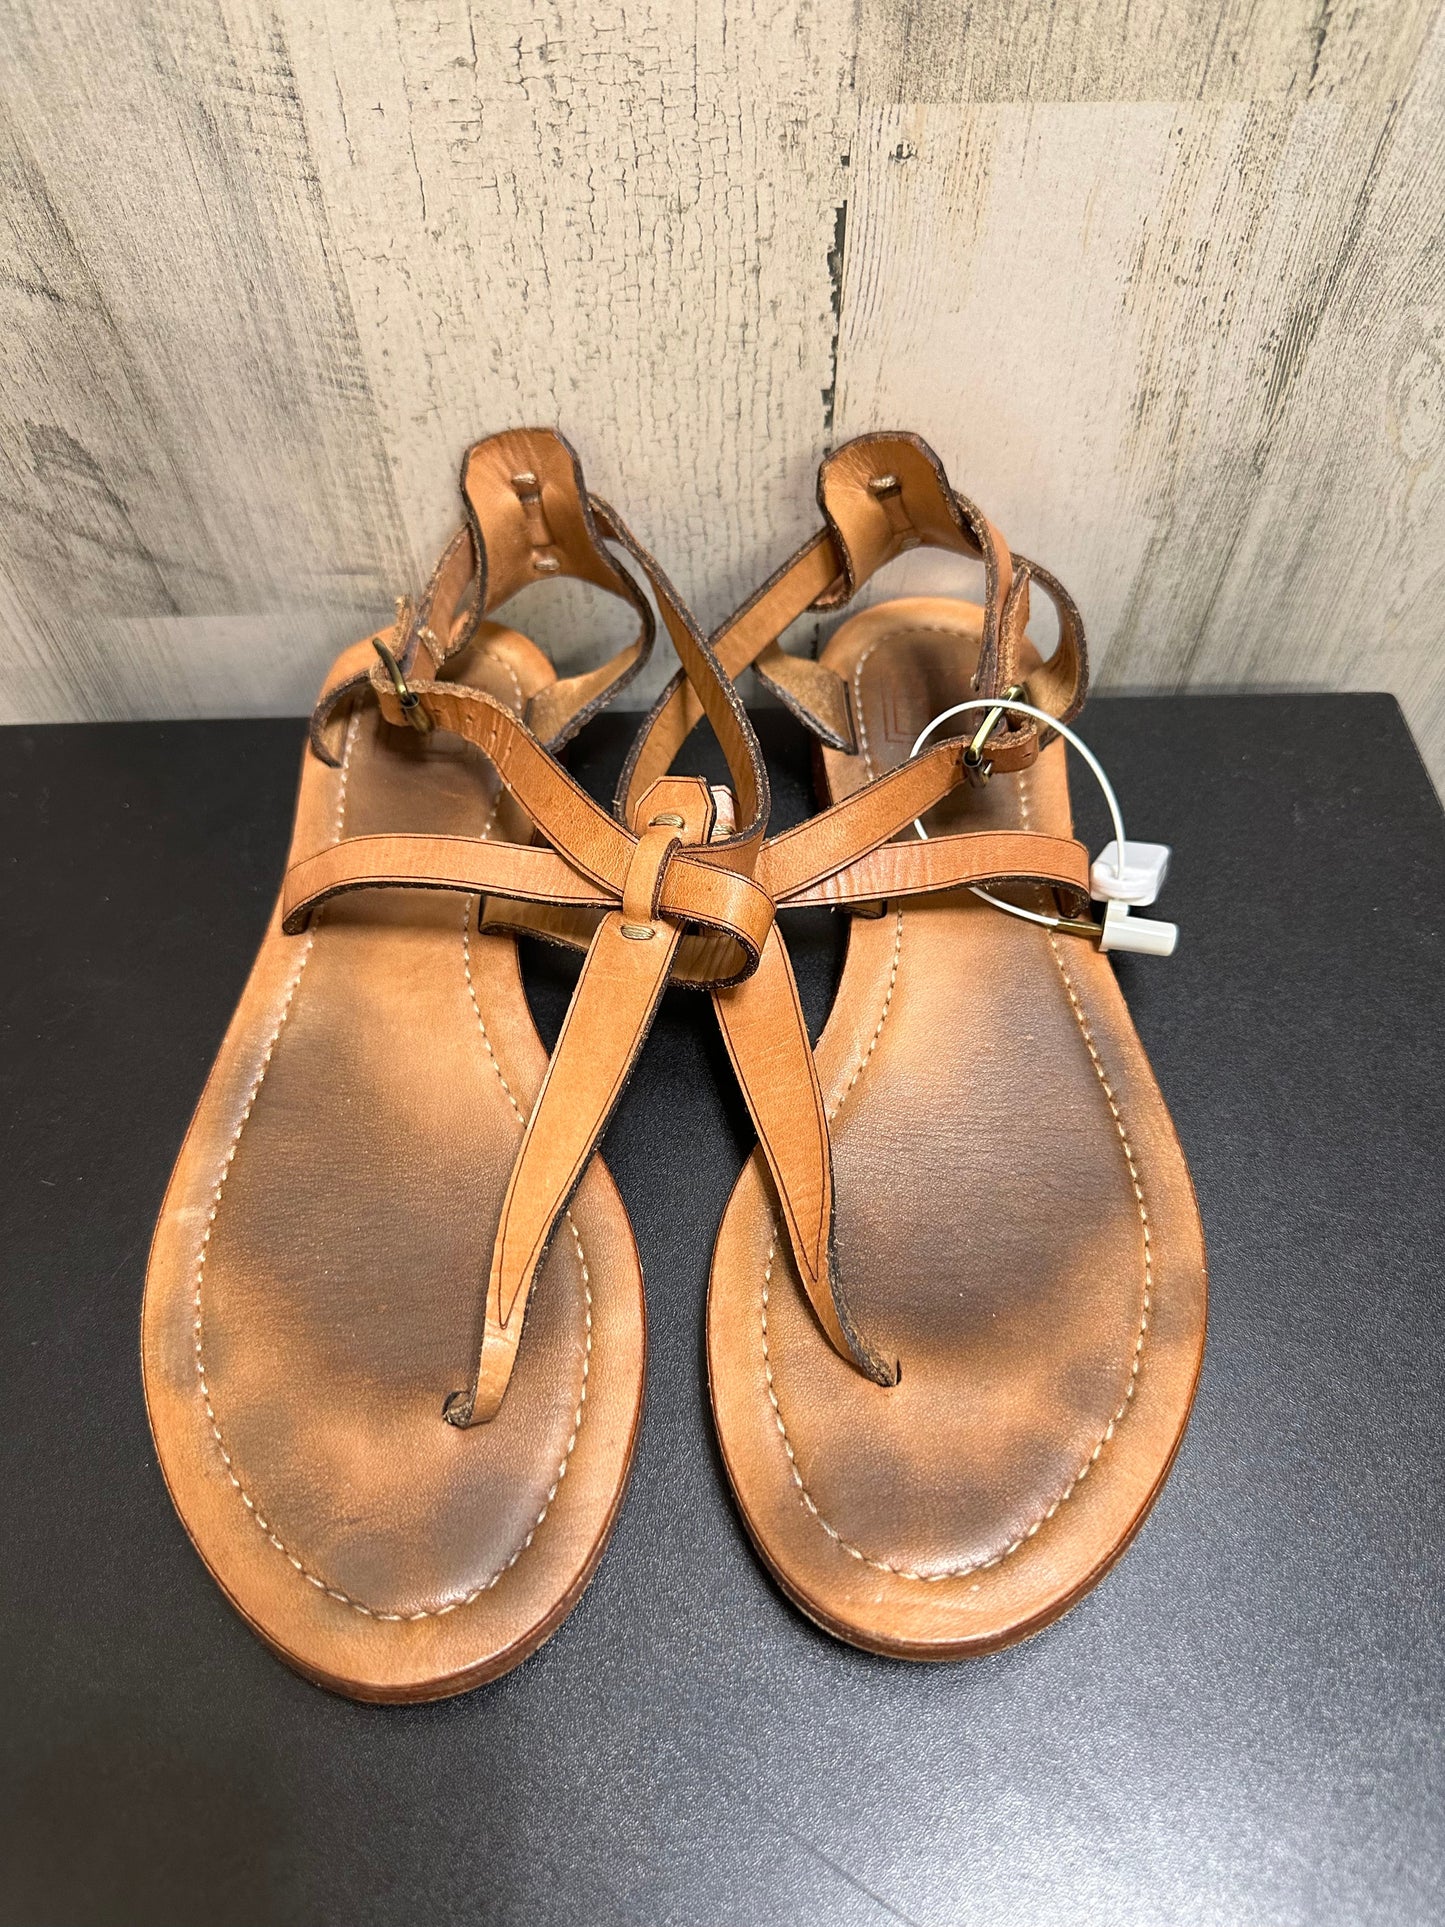 Brown Sandals Flats Frye, Size 8